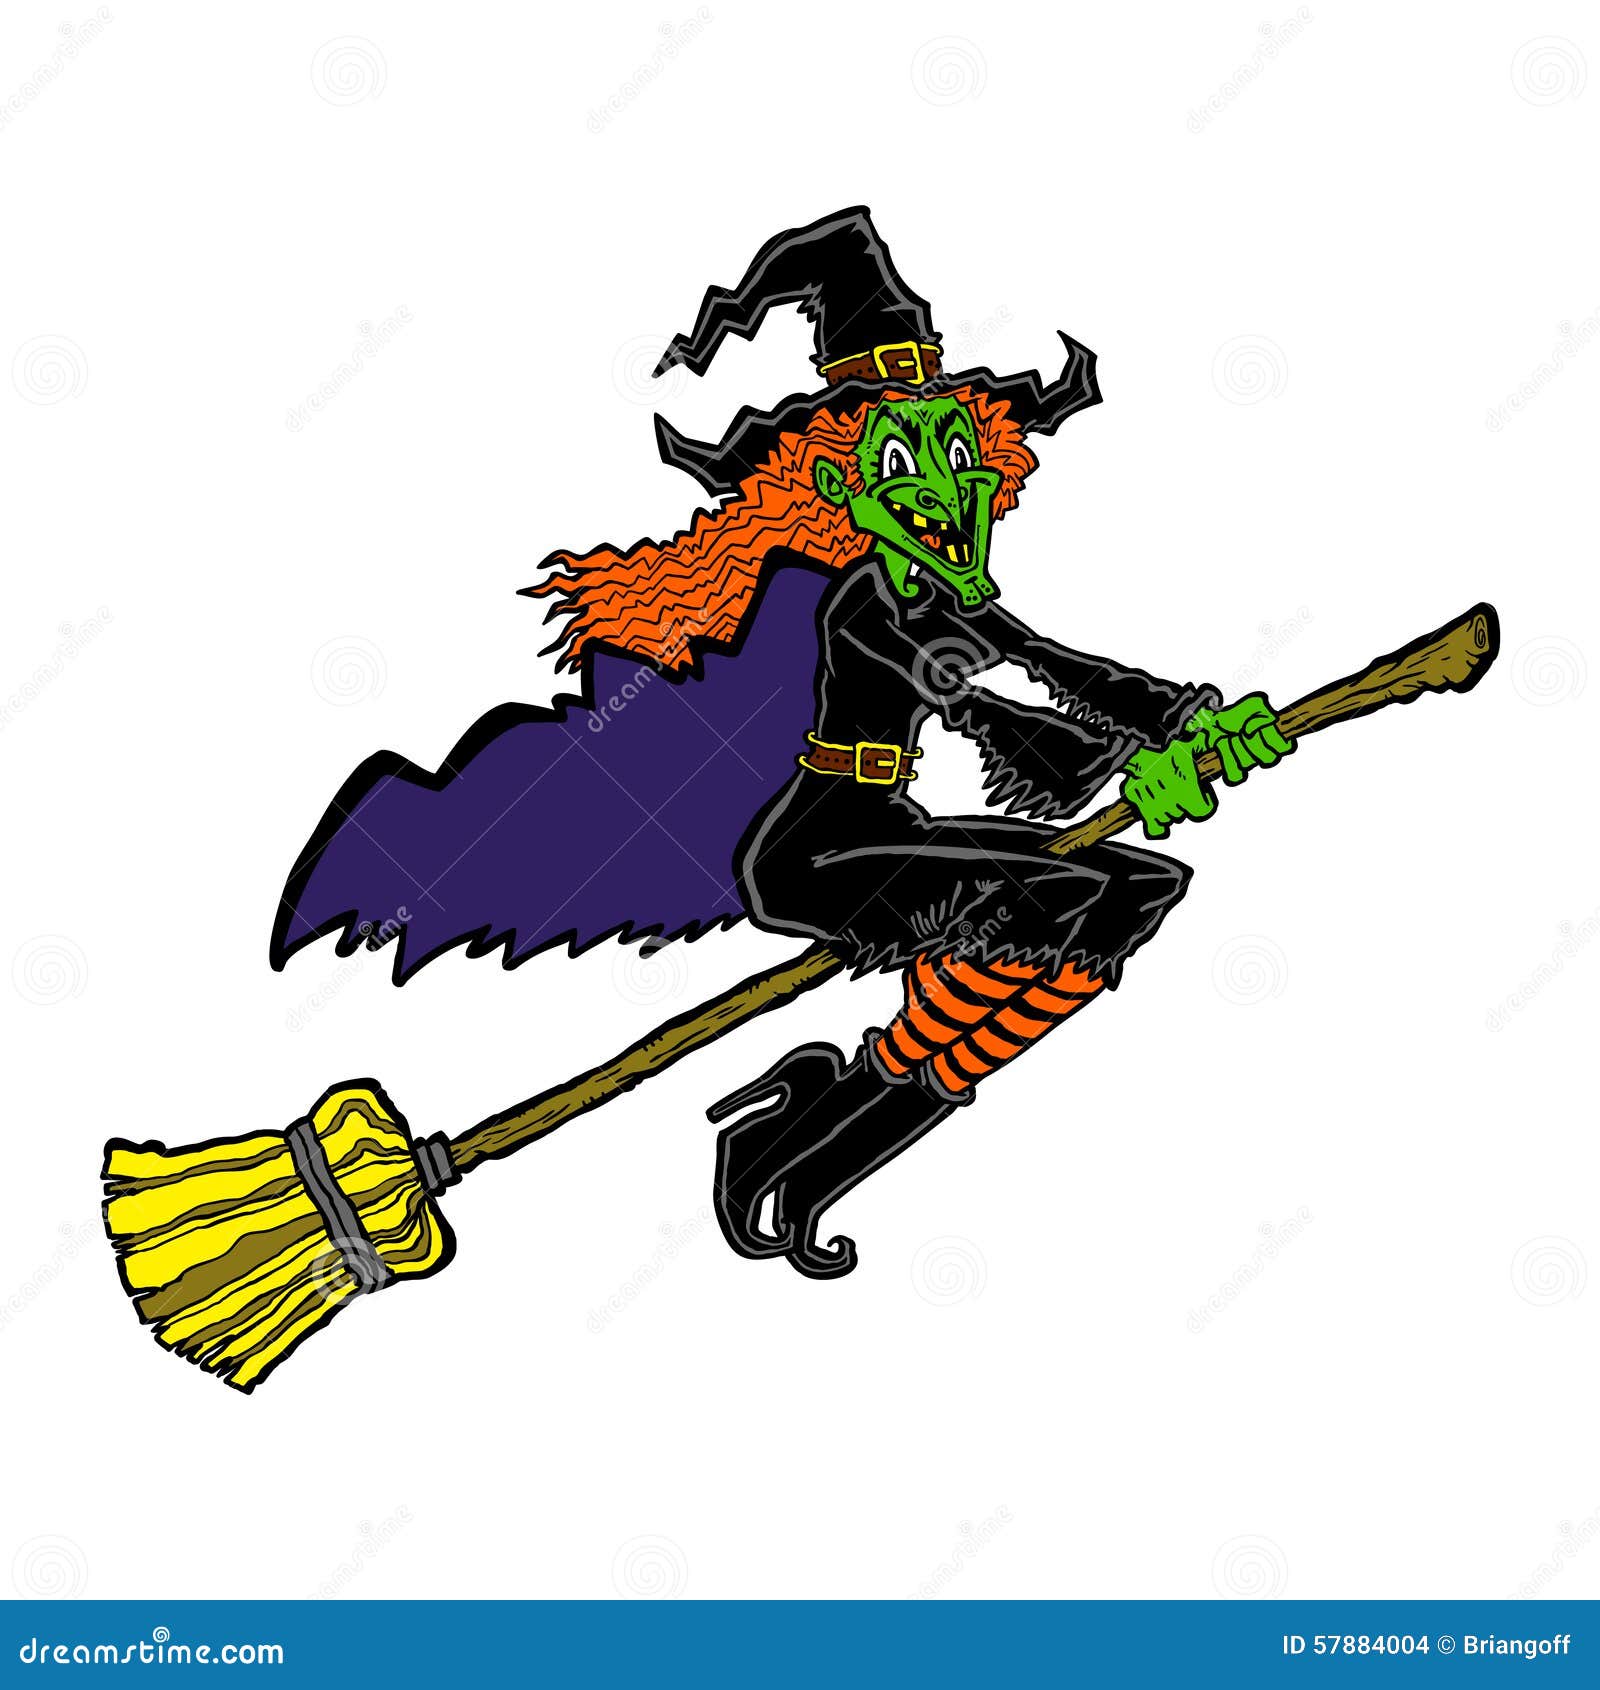 Witch Cartoon stock vector. Illustration of witch, fantasy - 57884004